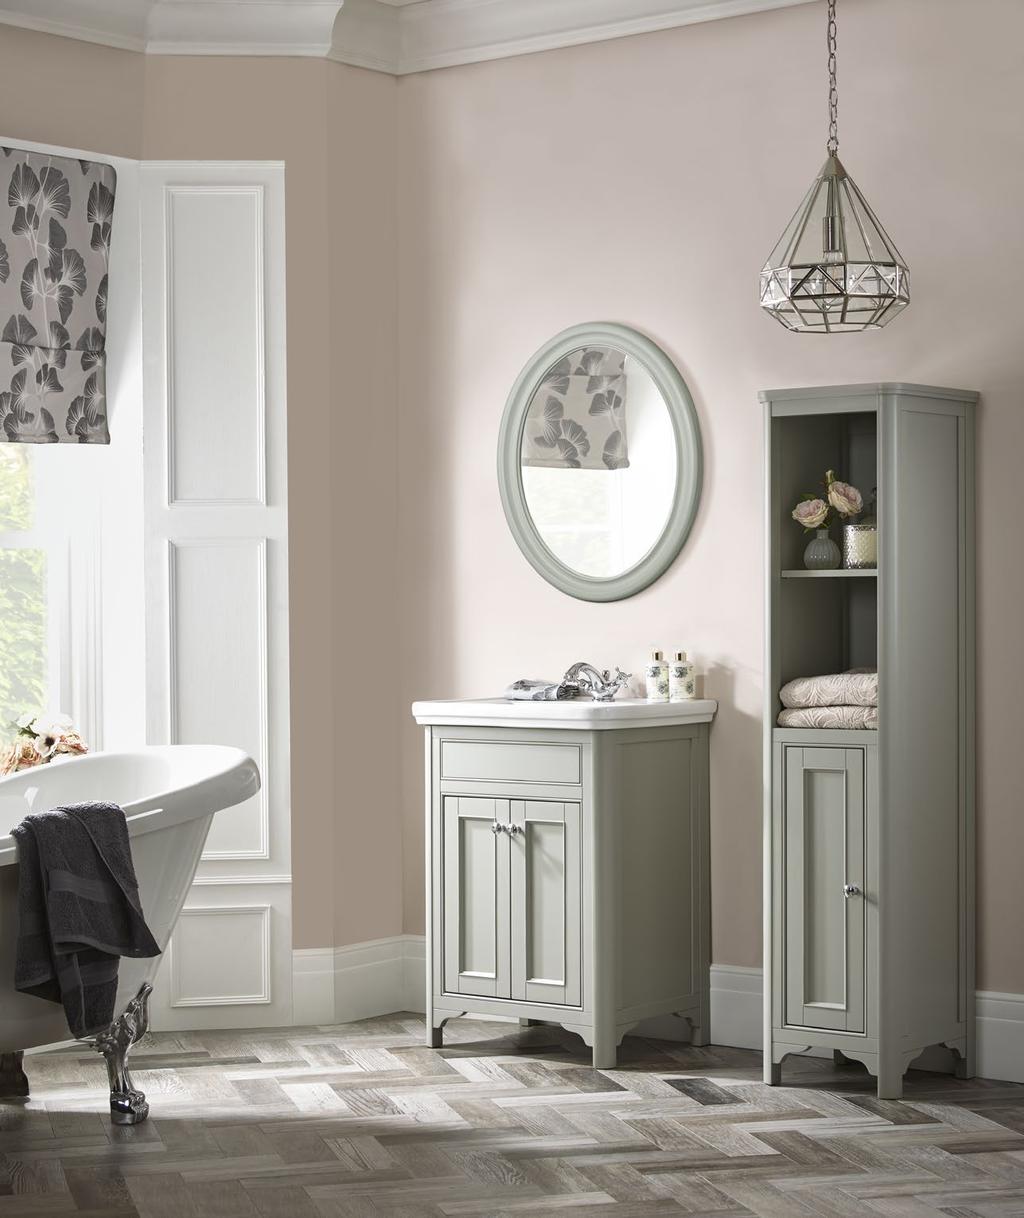 LANGHAM Quality and Craftsmanship Curved pilasters and subtle beading bring classical carpentry into your bathroom.